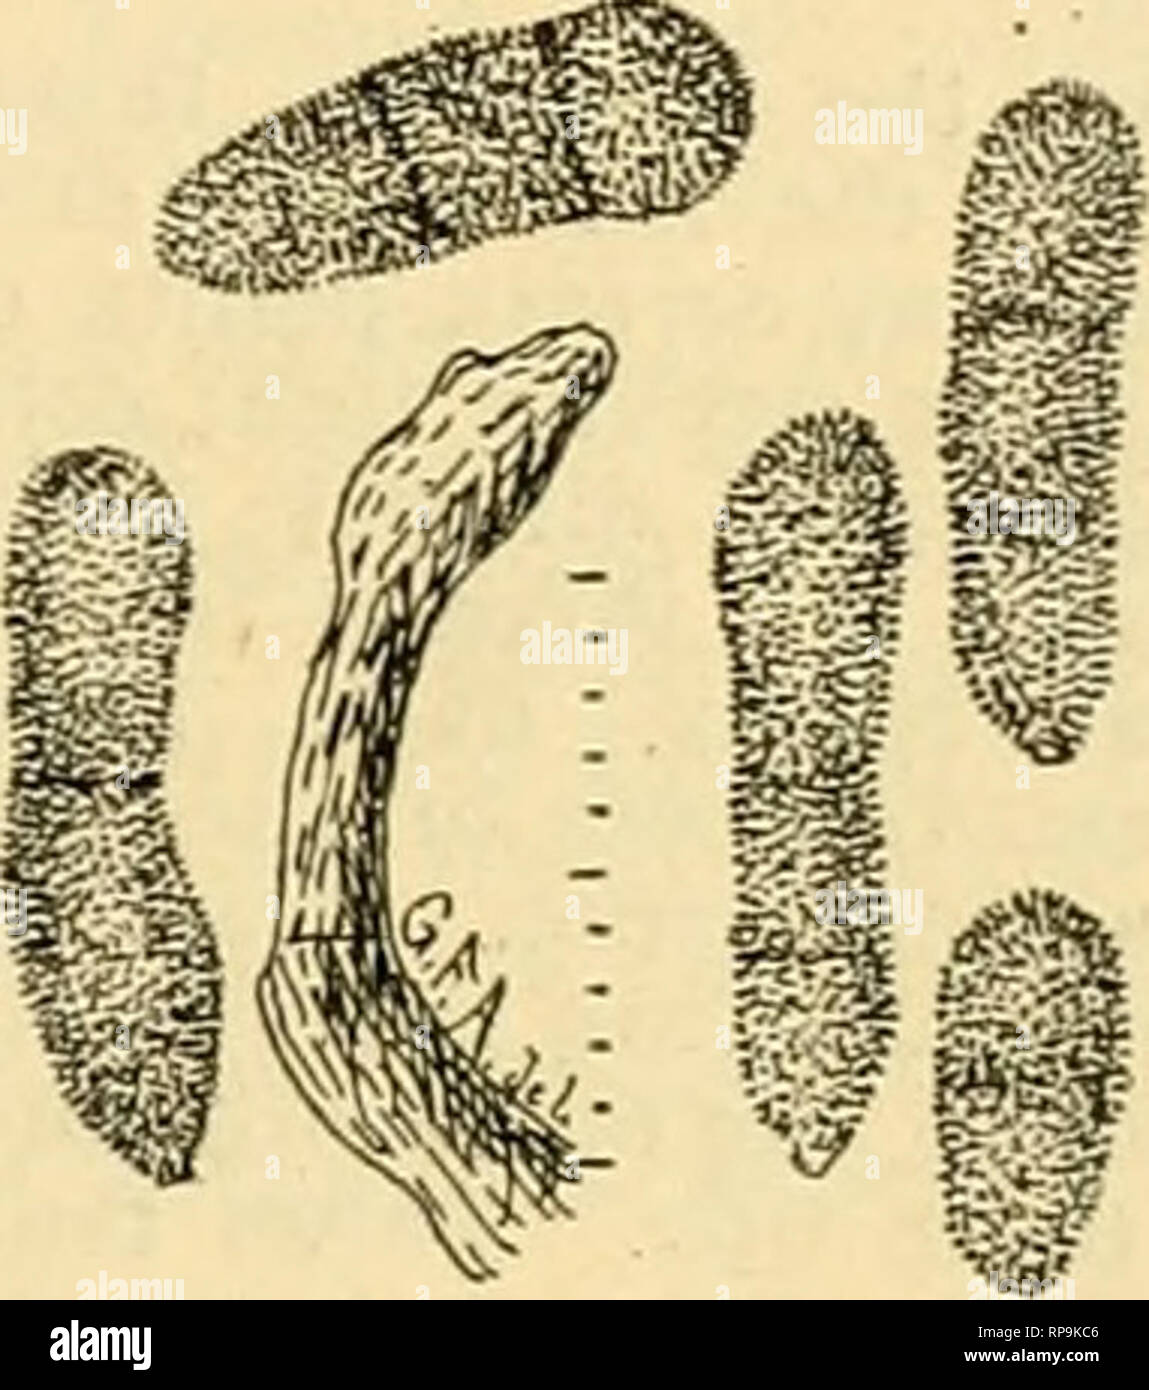 . The American florist : a weekly journal for the trade. Floriculture; Florists. Fig. 29. H. echinulatum, from Rou- meguere Fungi Gallici No. lOSO. Mag- nified 30 times more than the scafe From a species ol Iris. Fig. 28. H. echinulatum. spores germinating. Magnified 30 times more than the scale.. Fig. 30. H Dianthi, S &amp; R. (A syn onvmof H. echinulatum), Roumeguere Pnngi Gallici No. 1431. Magnified 30 times more than the scale. Fig. 31. Cludosporium herbarum var. nodosum. Tuft of fruiting threads and spores. Magnifiod 30 times more than the scale. nations that they &quot;run out.&quot; The Stock Photo